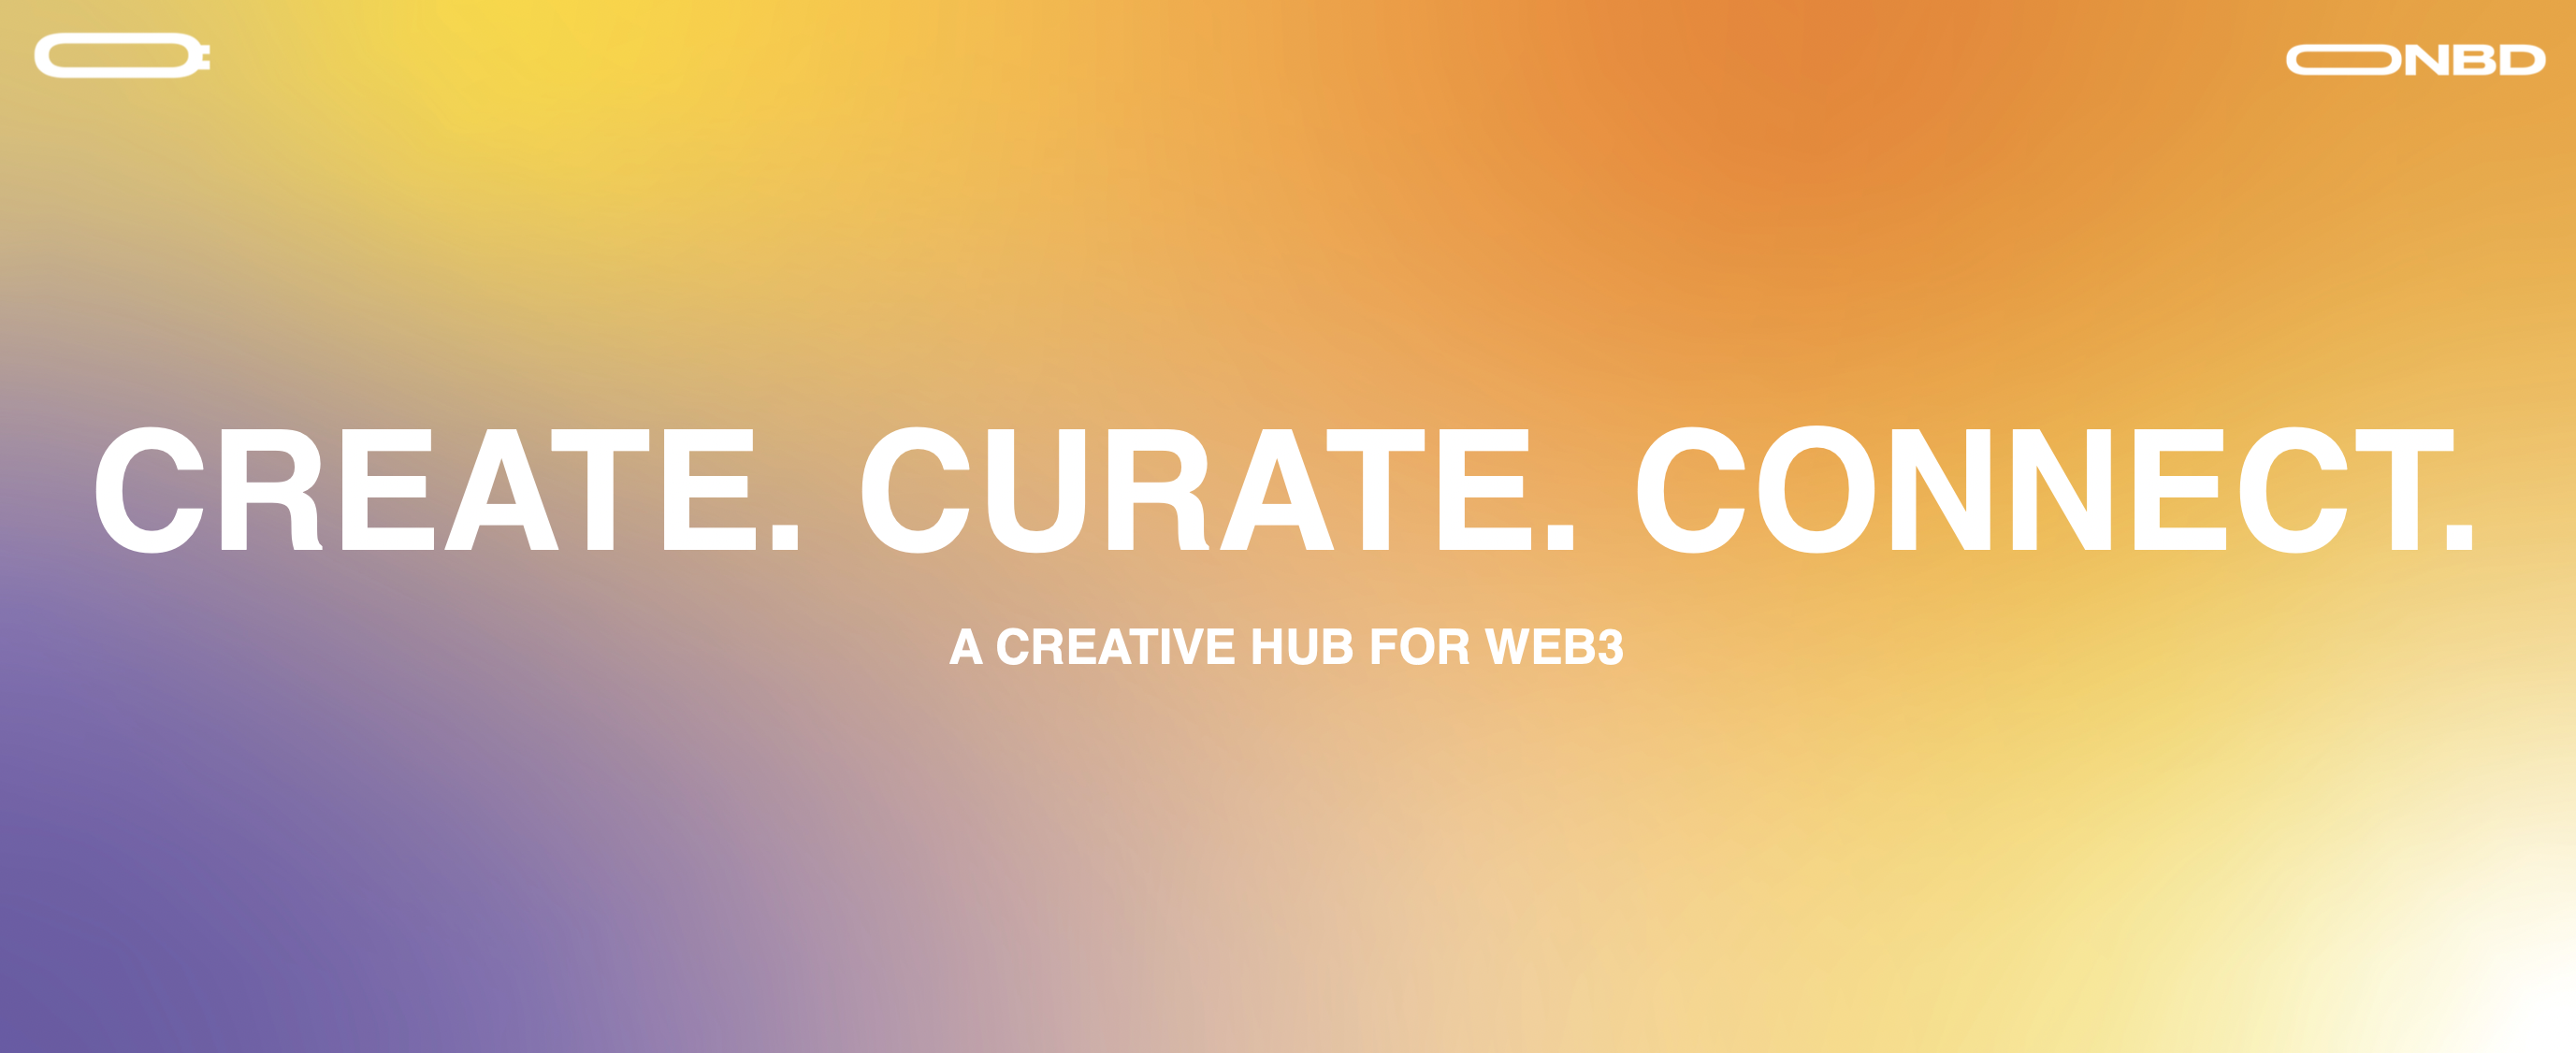 Why is it important for curators to work collectively?